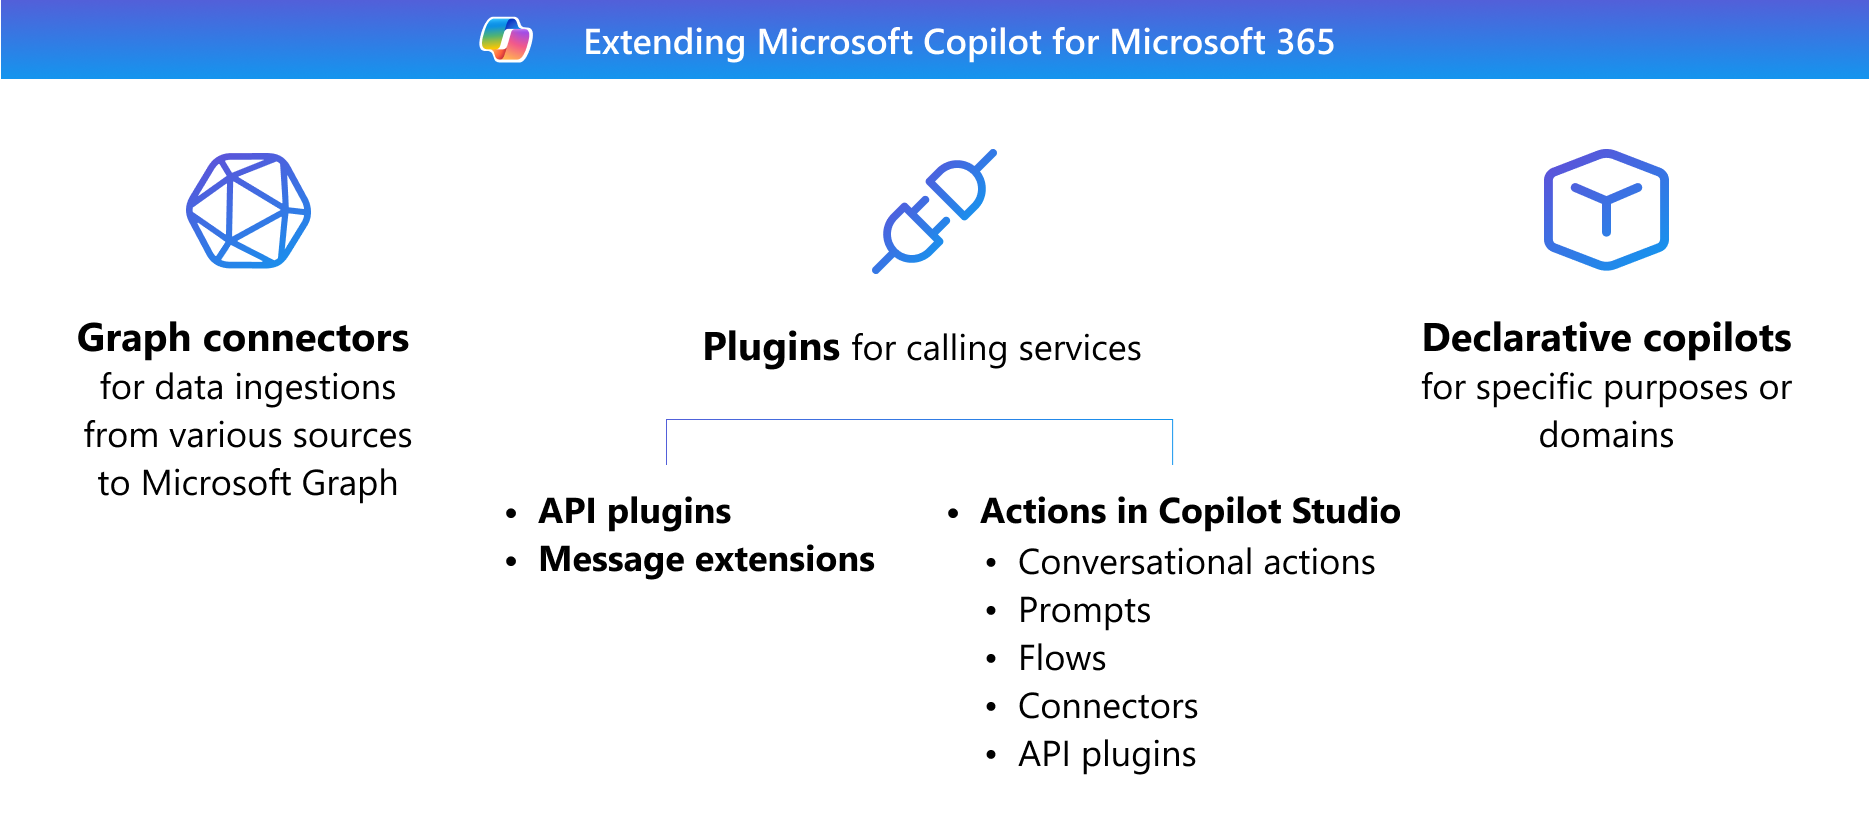 This illustration shows types of extensibility options, Graph connector, plugins, and declarative copilots